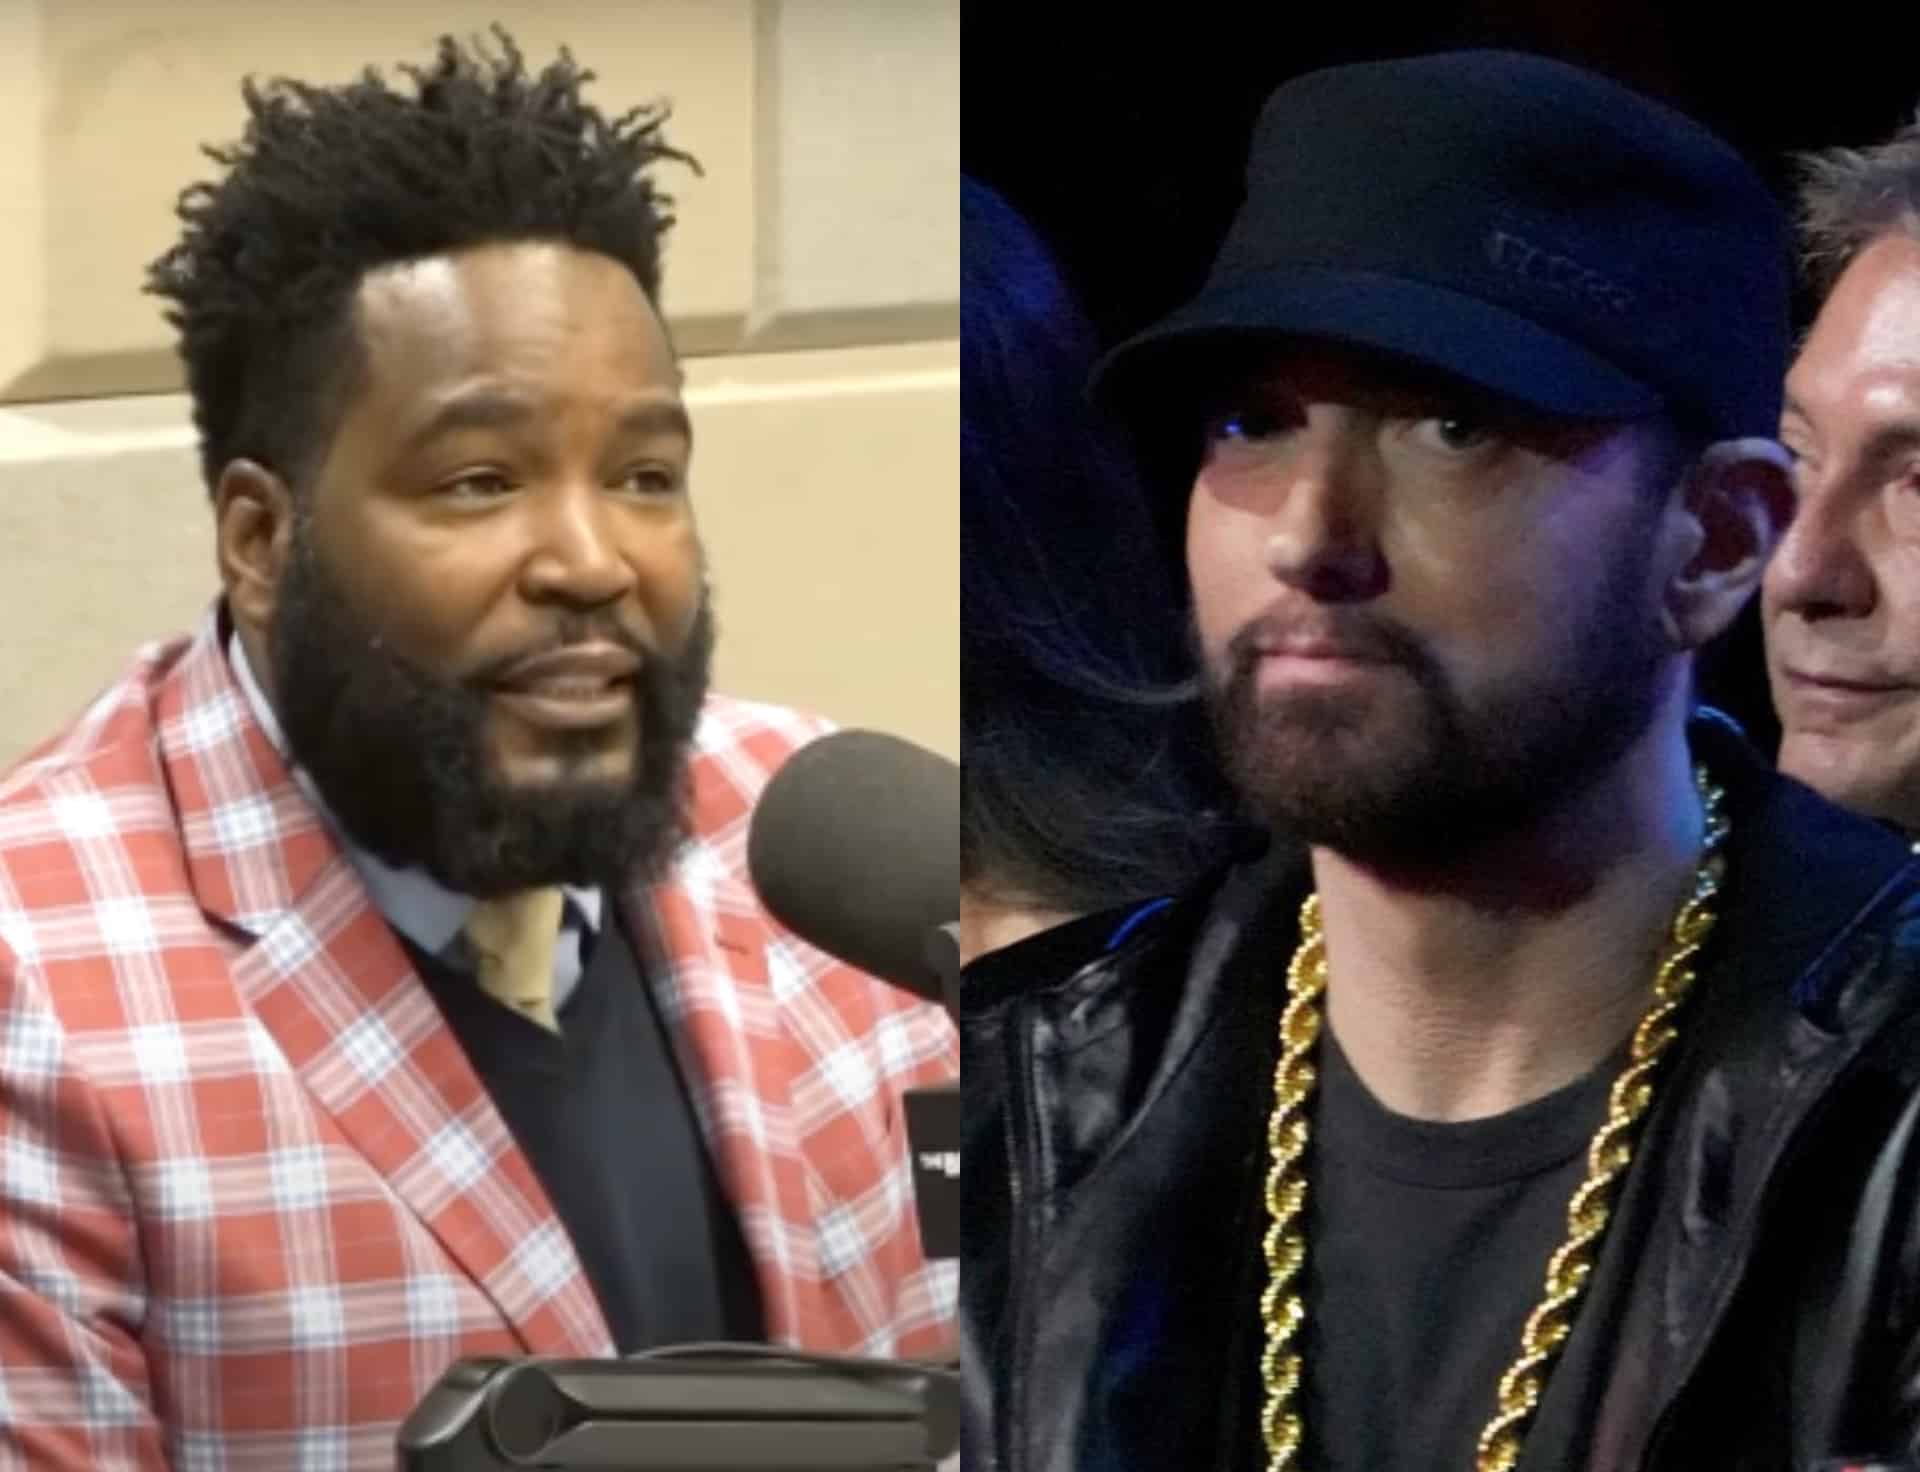 Dr. Umar Reacts To Criticism For His Remarks About Eminem Haven't They Stolen Enough